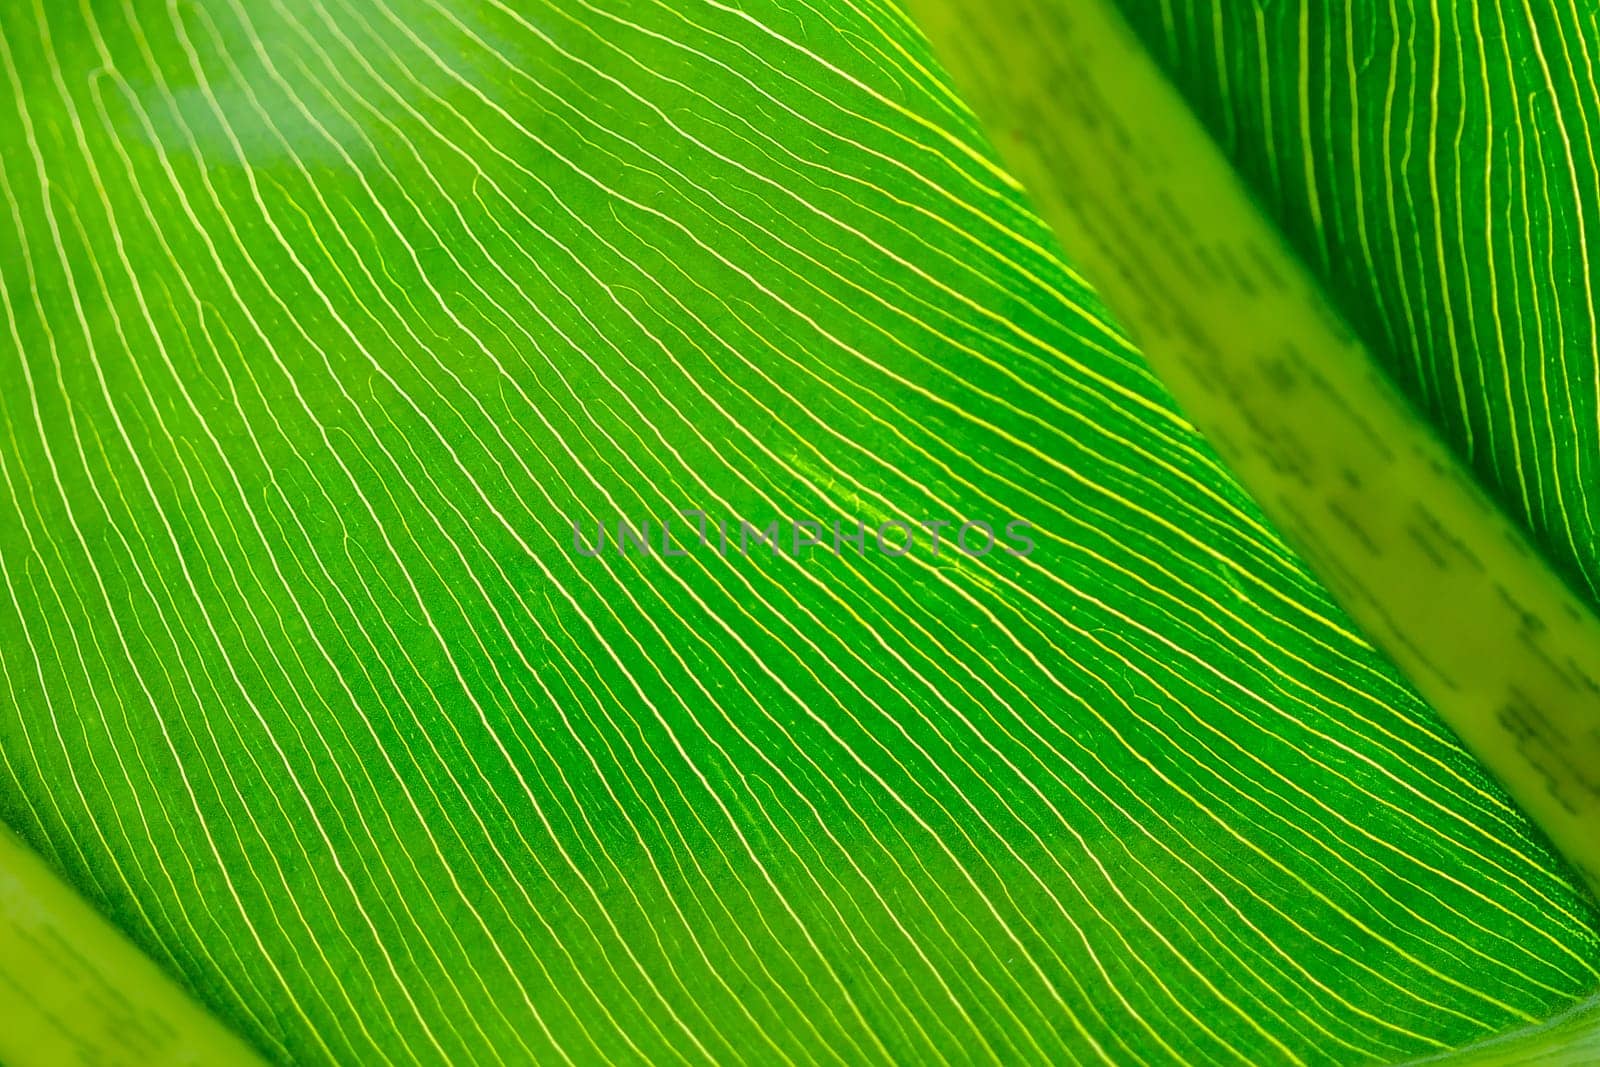 The back of green leaves with beautiful patterns